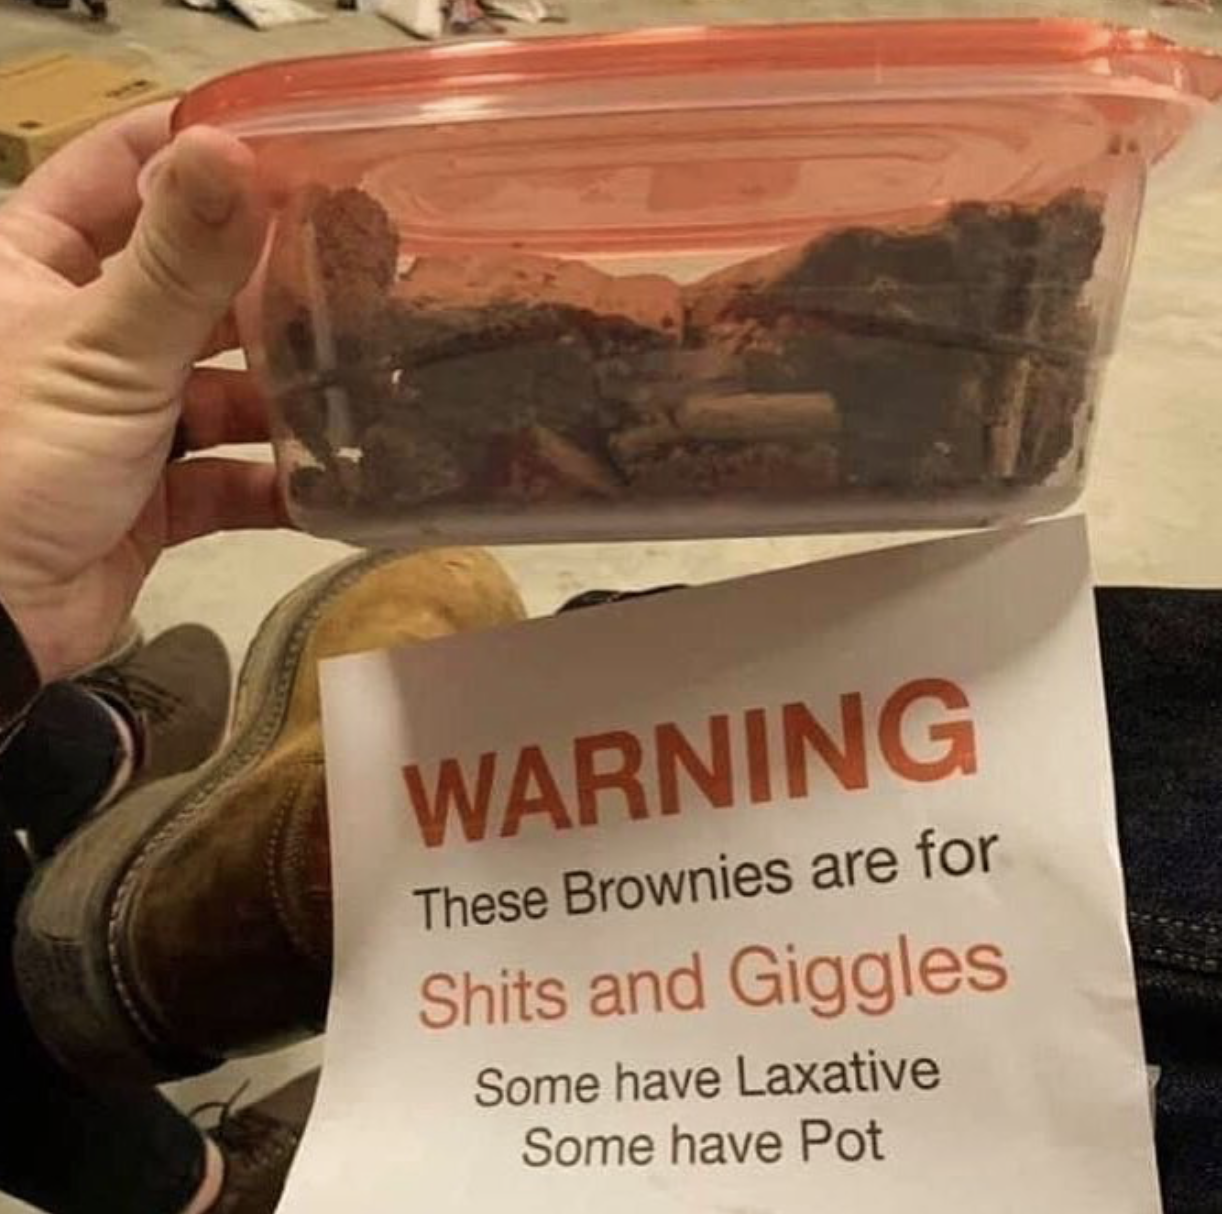 shits and giggles brownies - Warning These Brownies are for Shits and Giggles Some have Laxative Some have Pot